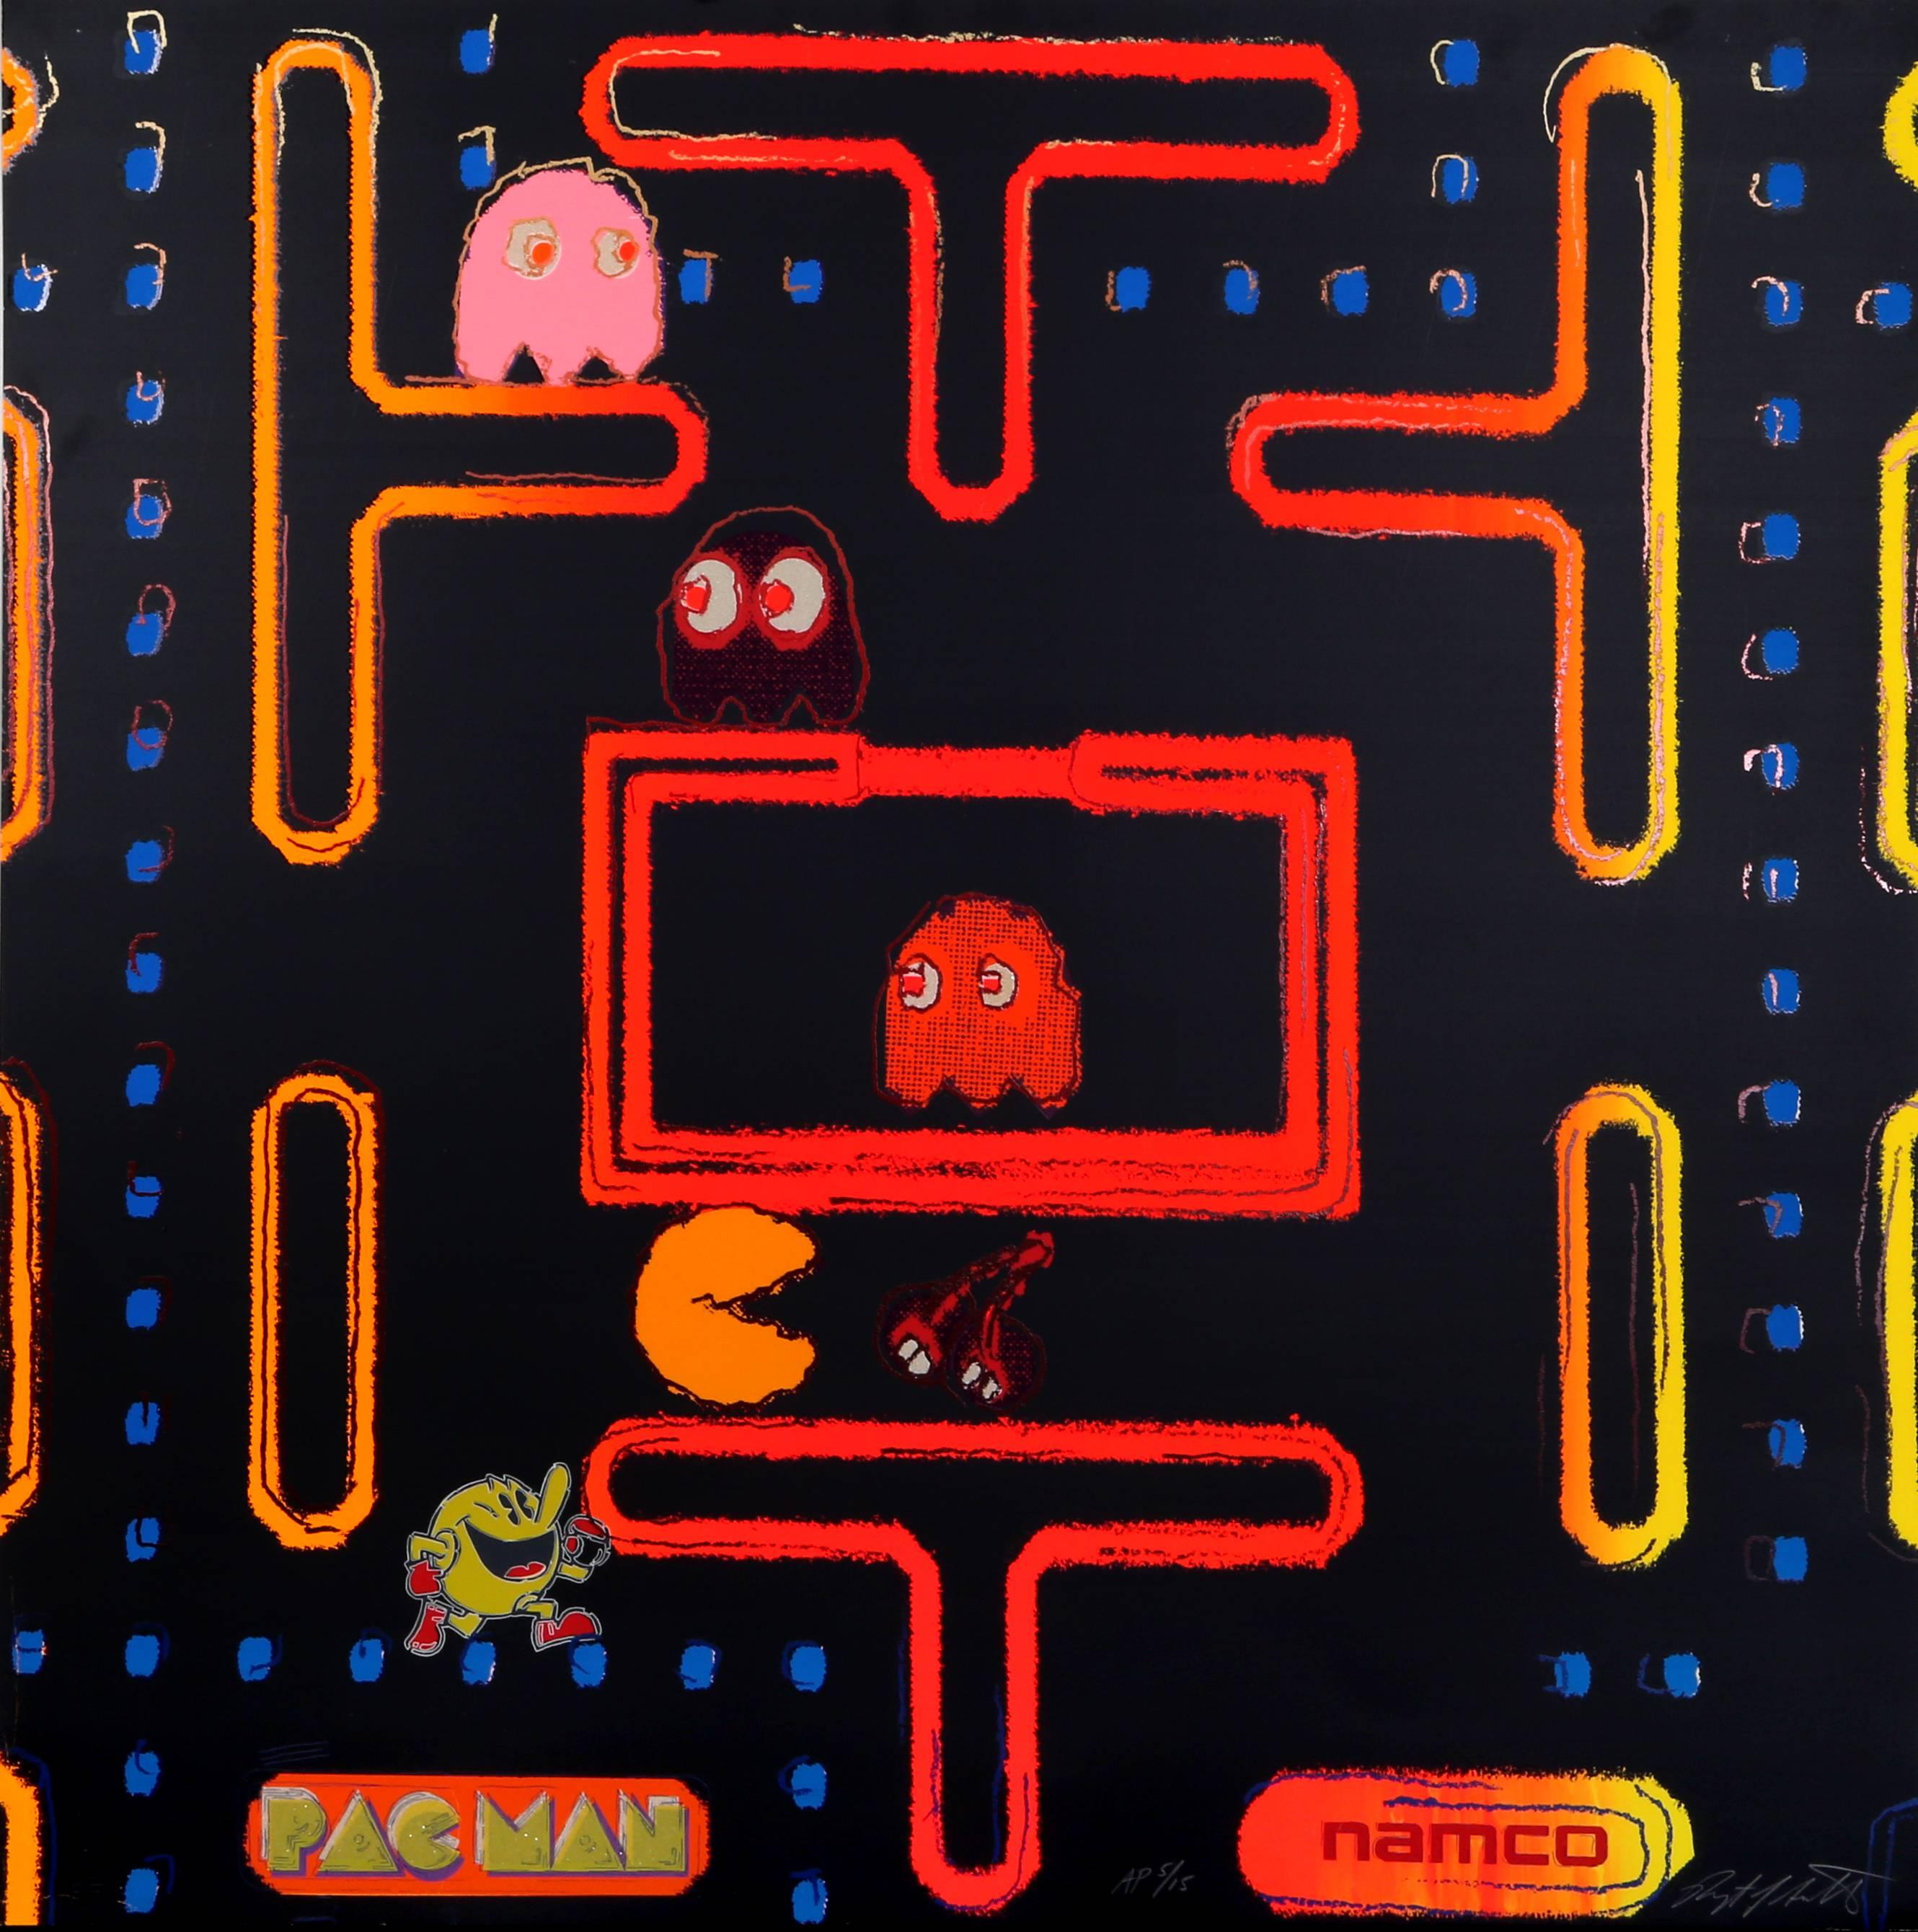 Pac-Man from the Homage to Andy Warhol Portfolio, Pop Art by Rupert Smith